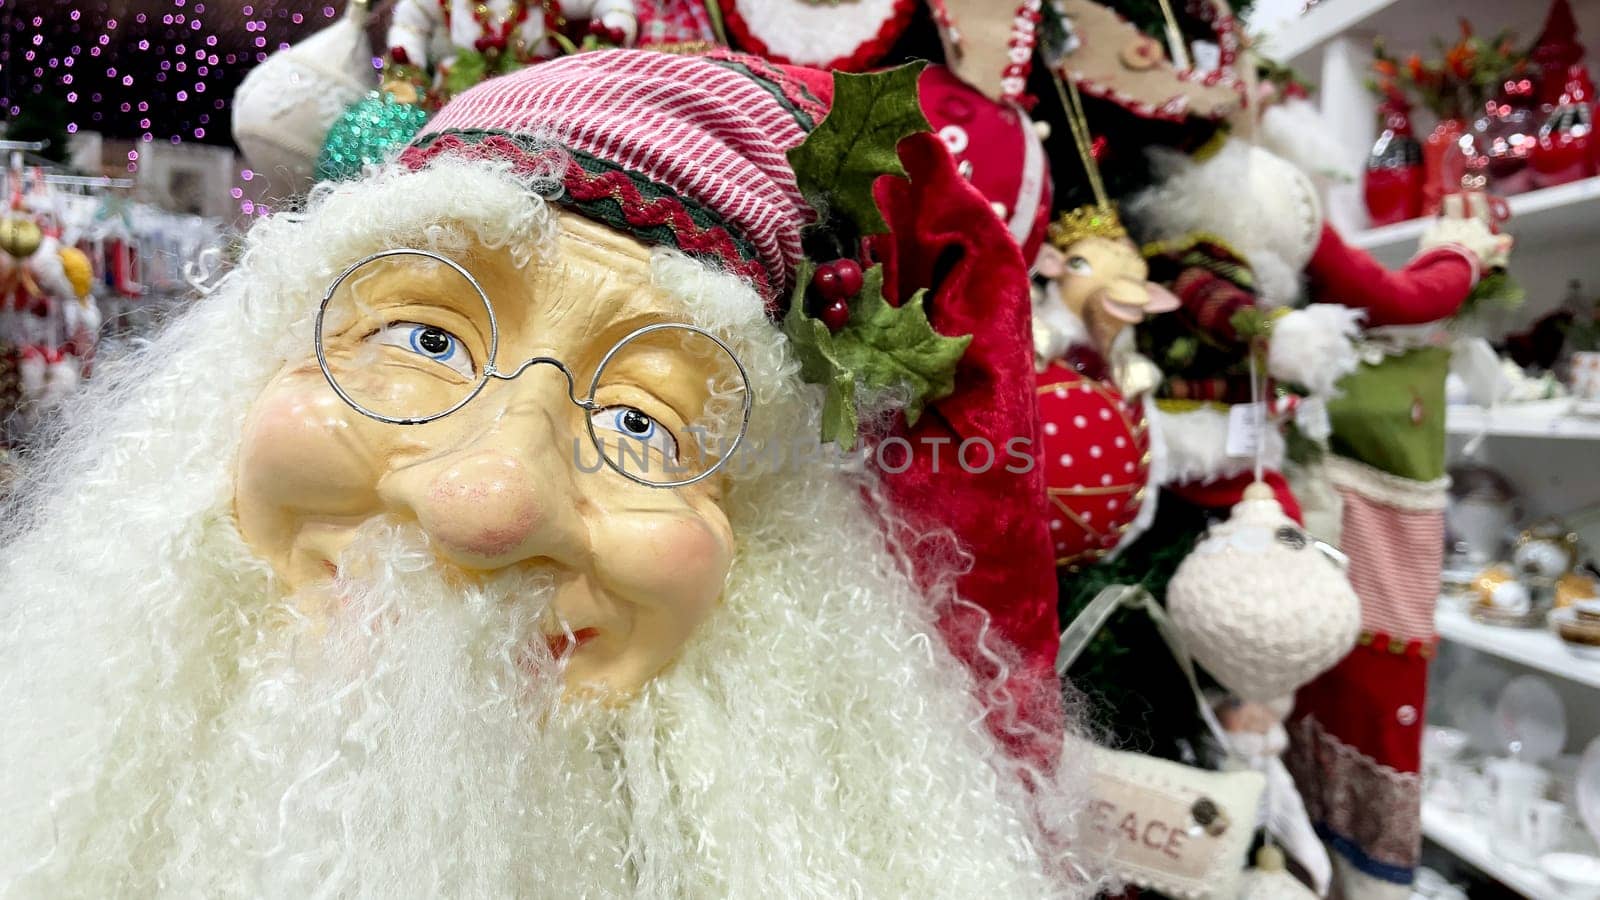 Santa Claus toy, close-up portrait with glasses. A fun Christmas event. Santa Claus doll at a Christmas festival or fair